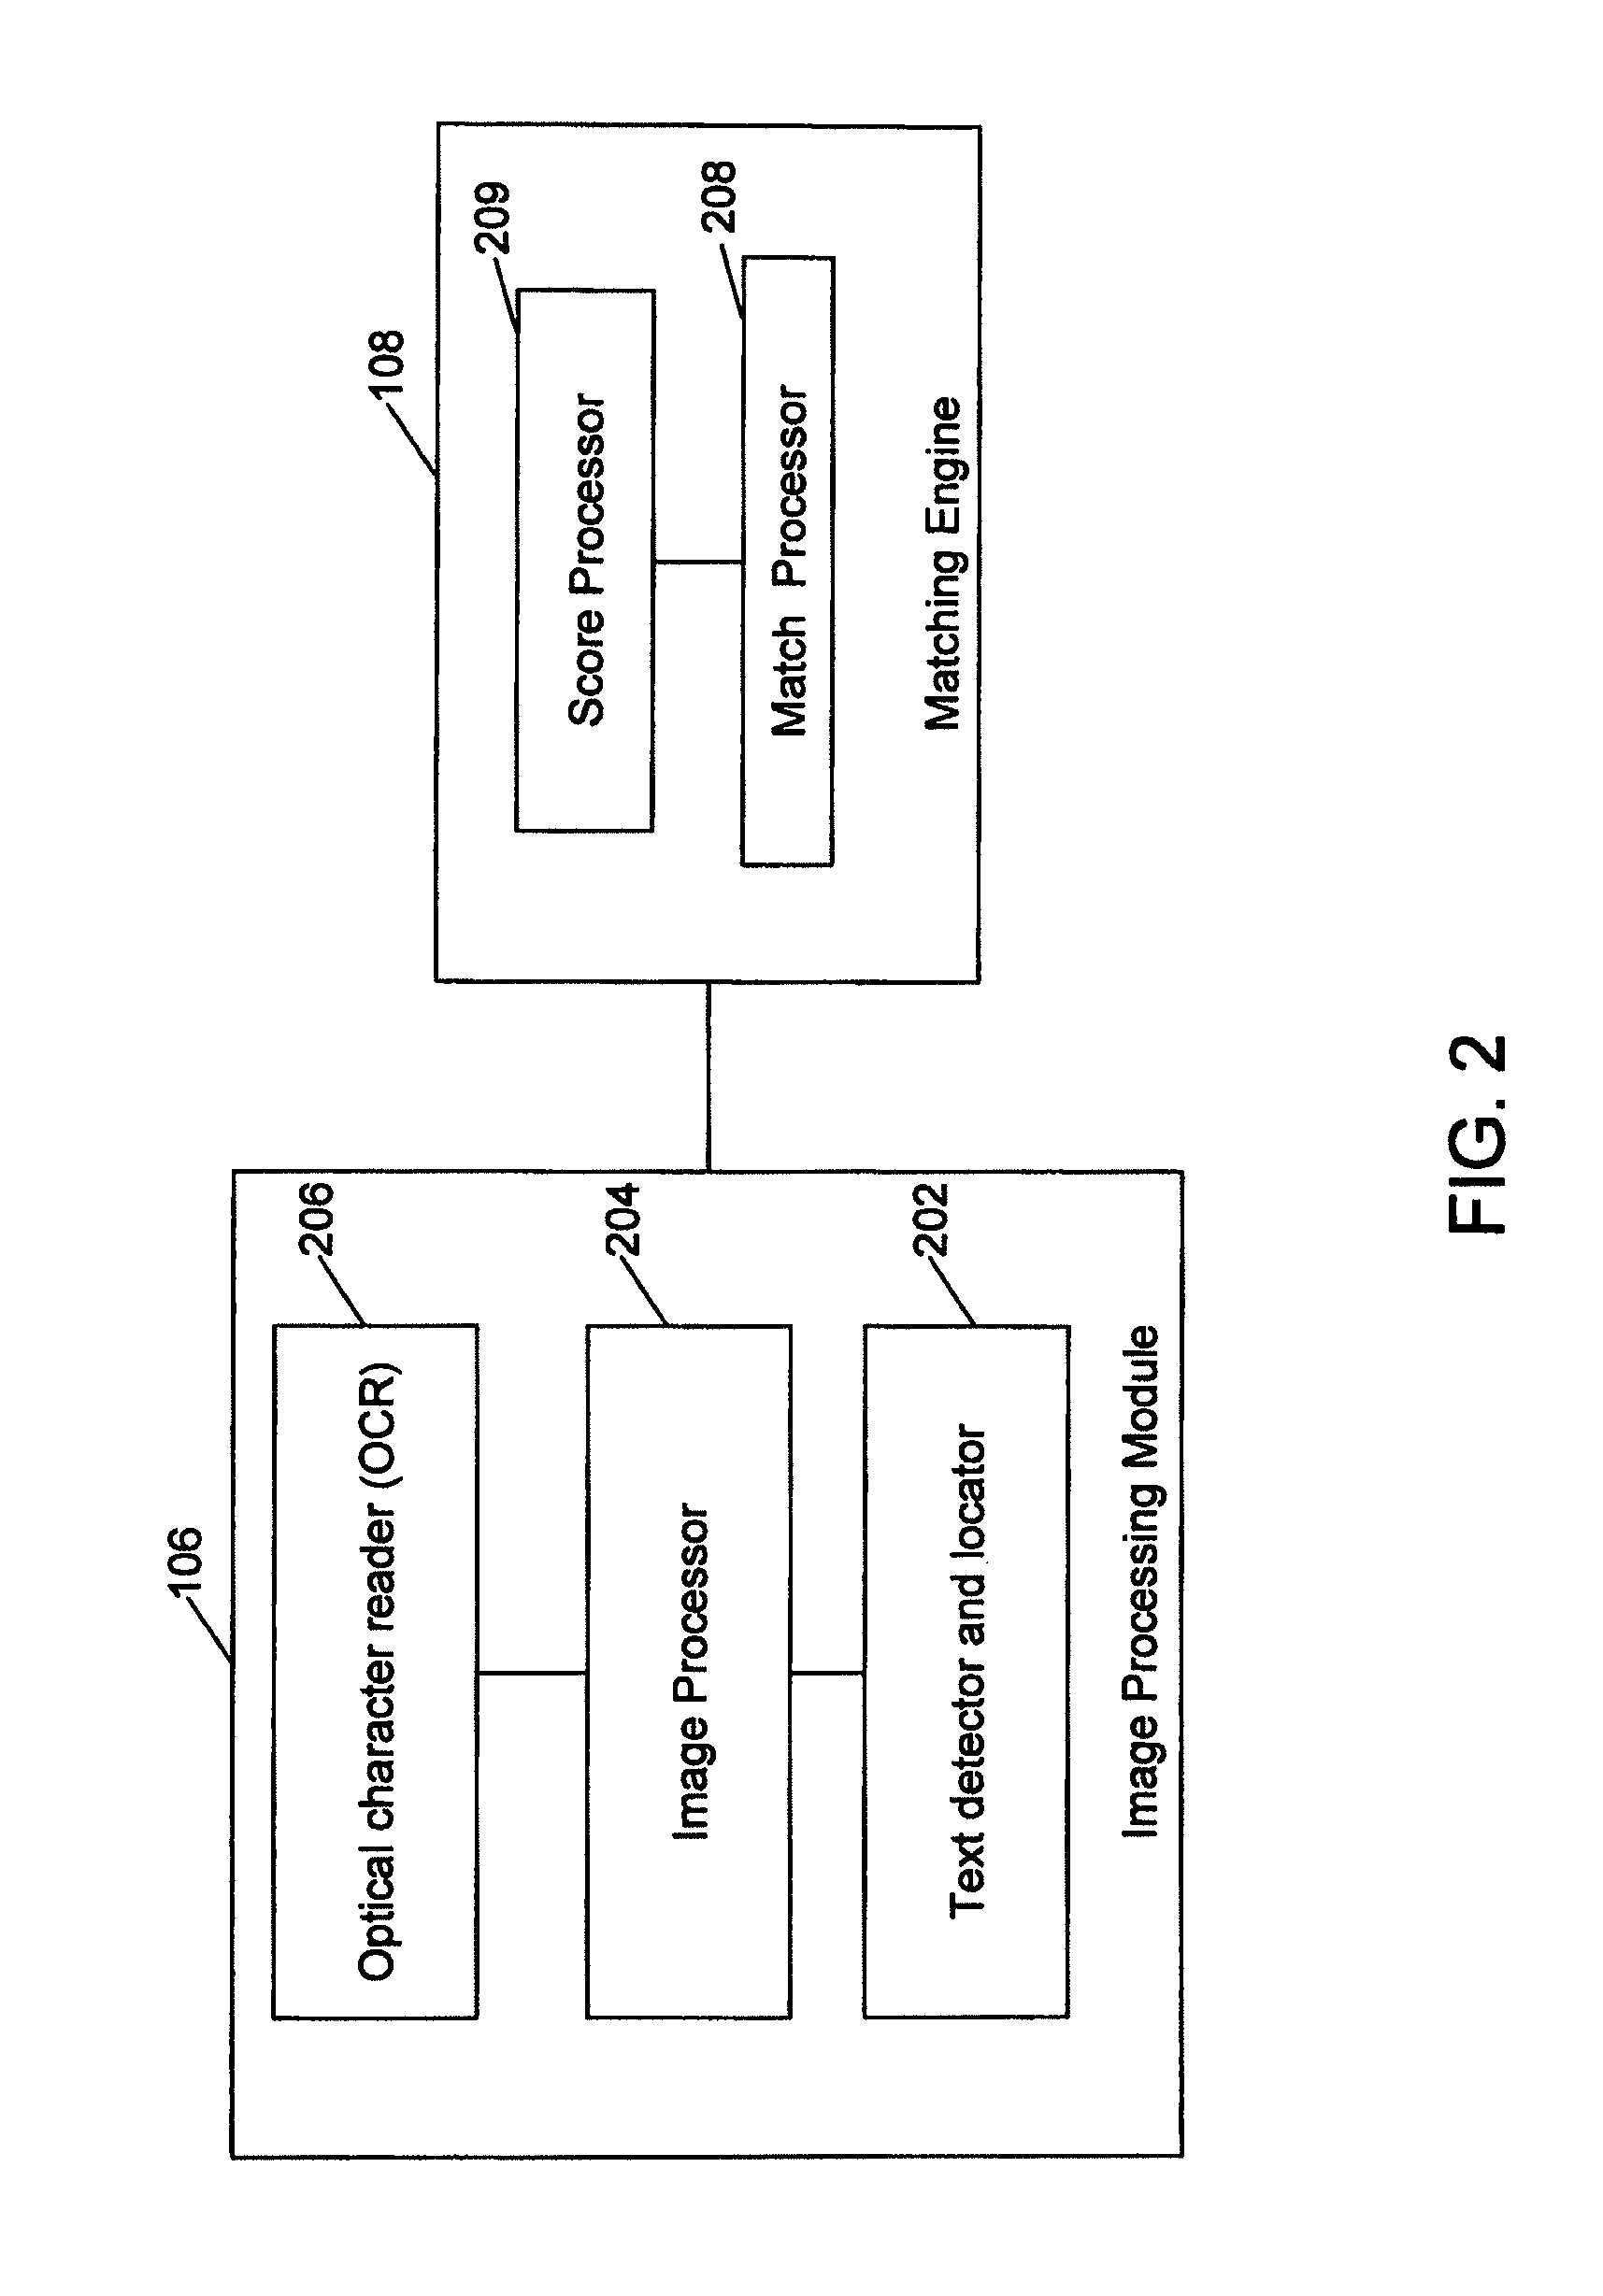 Method and system for searching for information on a network in response to an image query sent by a user from a mobile communications device